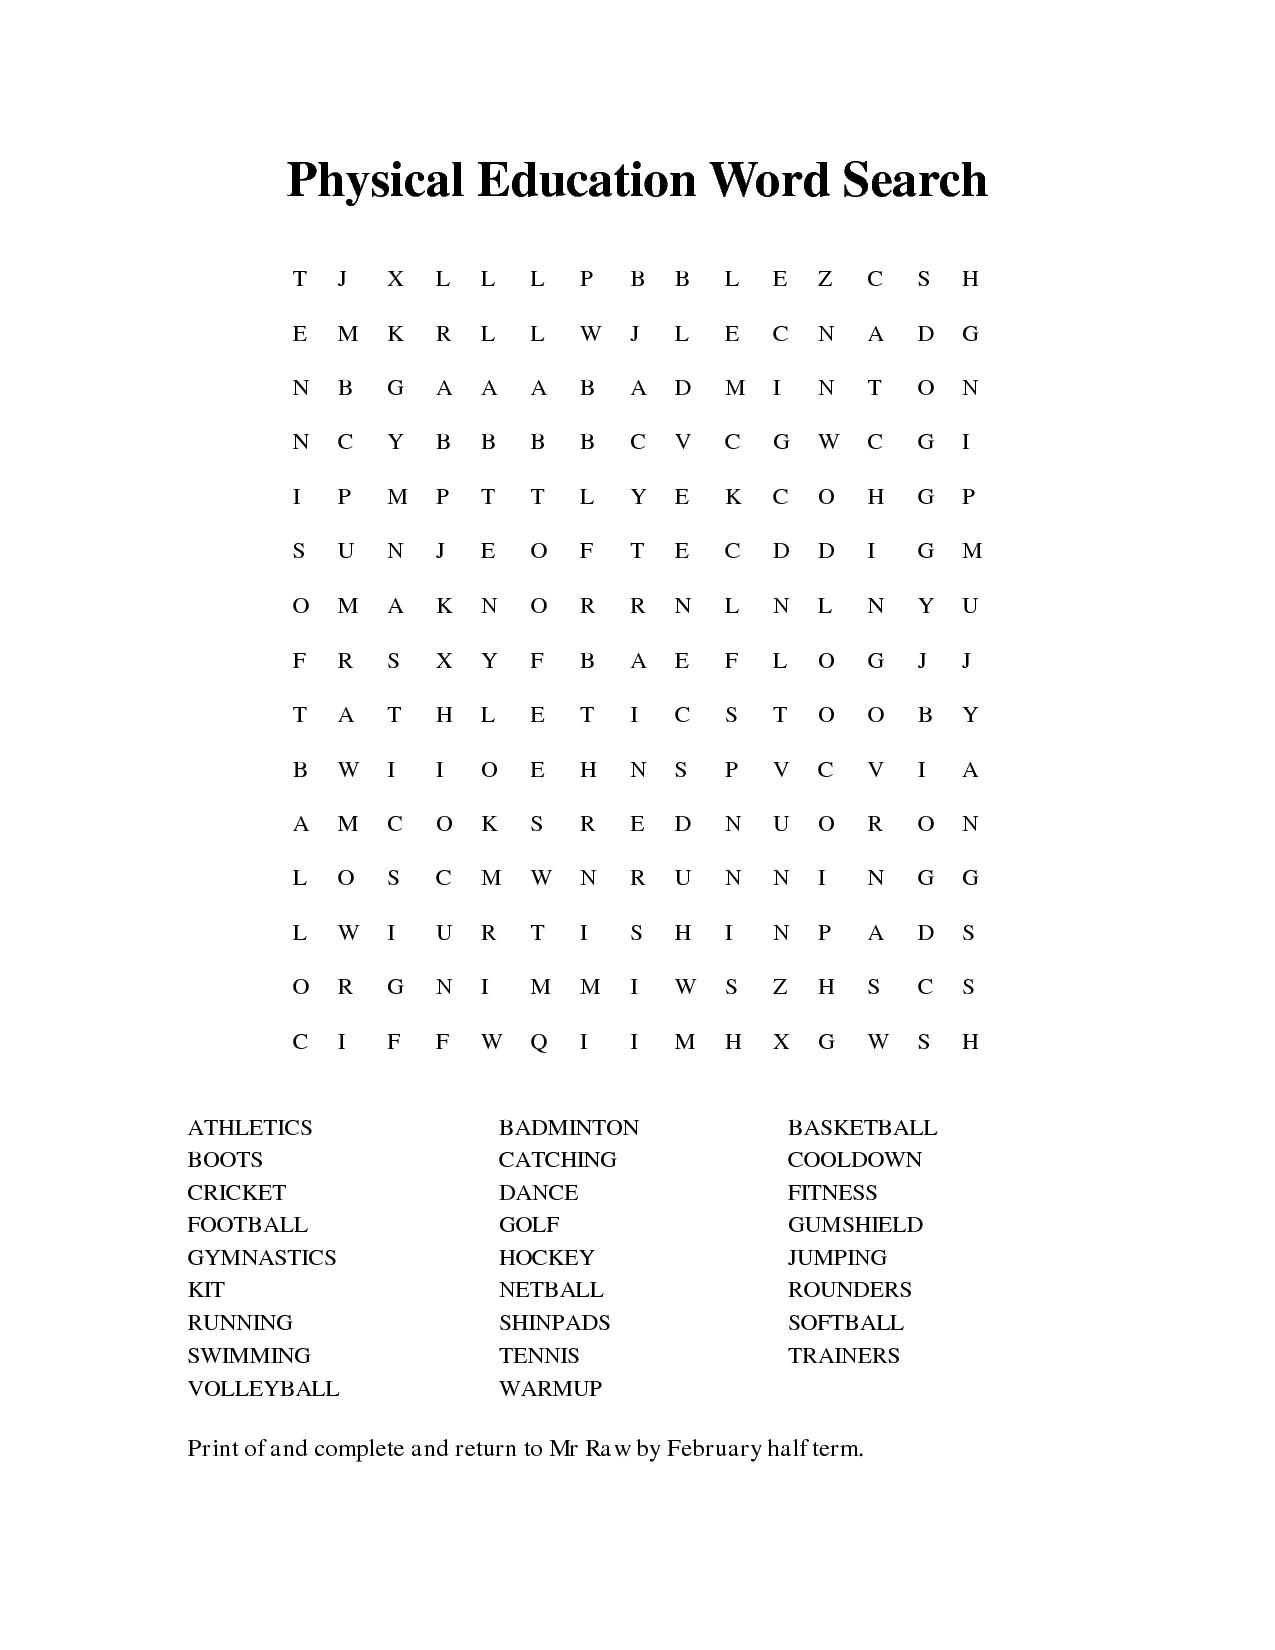 Physical Education Word Search | Physical Education, Health